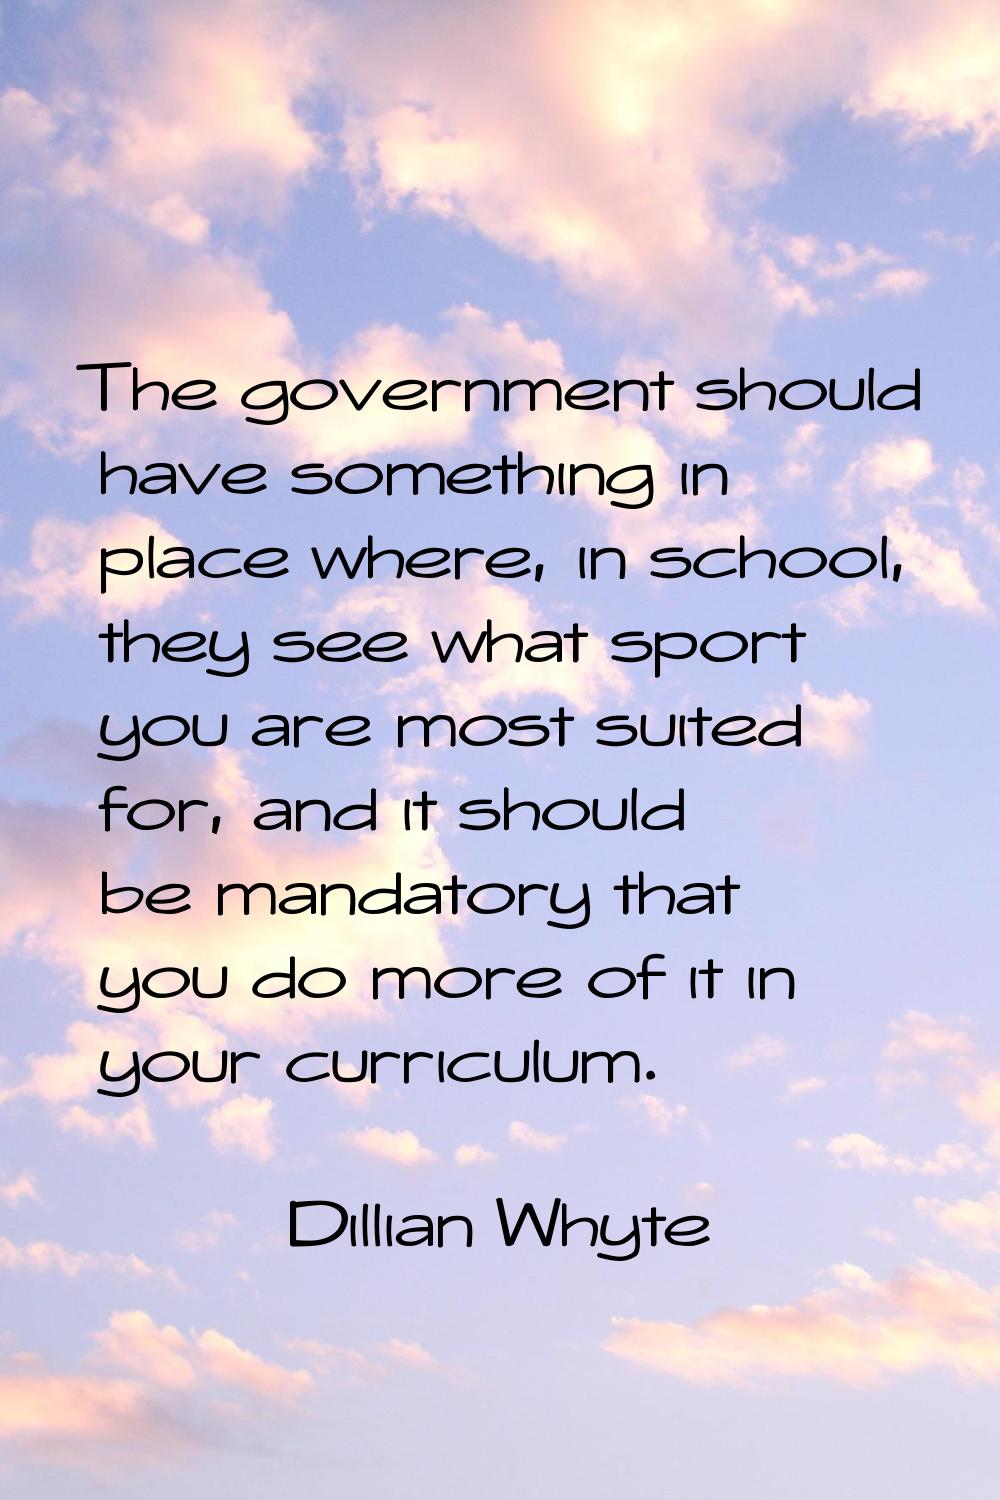 The government should have something in place where, in school, they see what sport you are most su